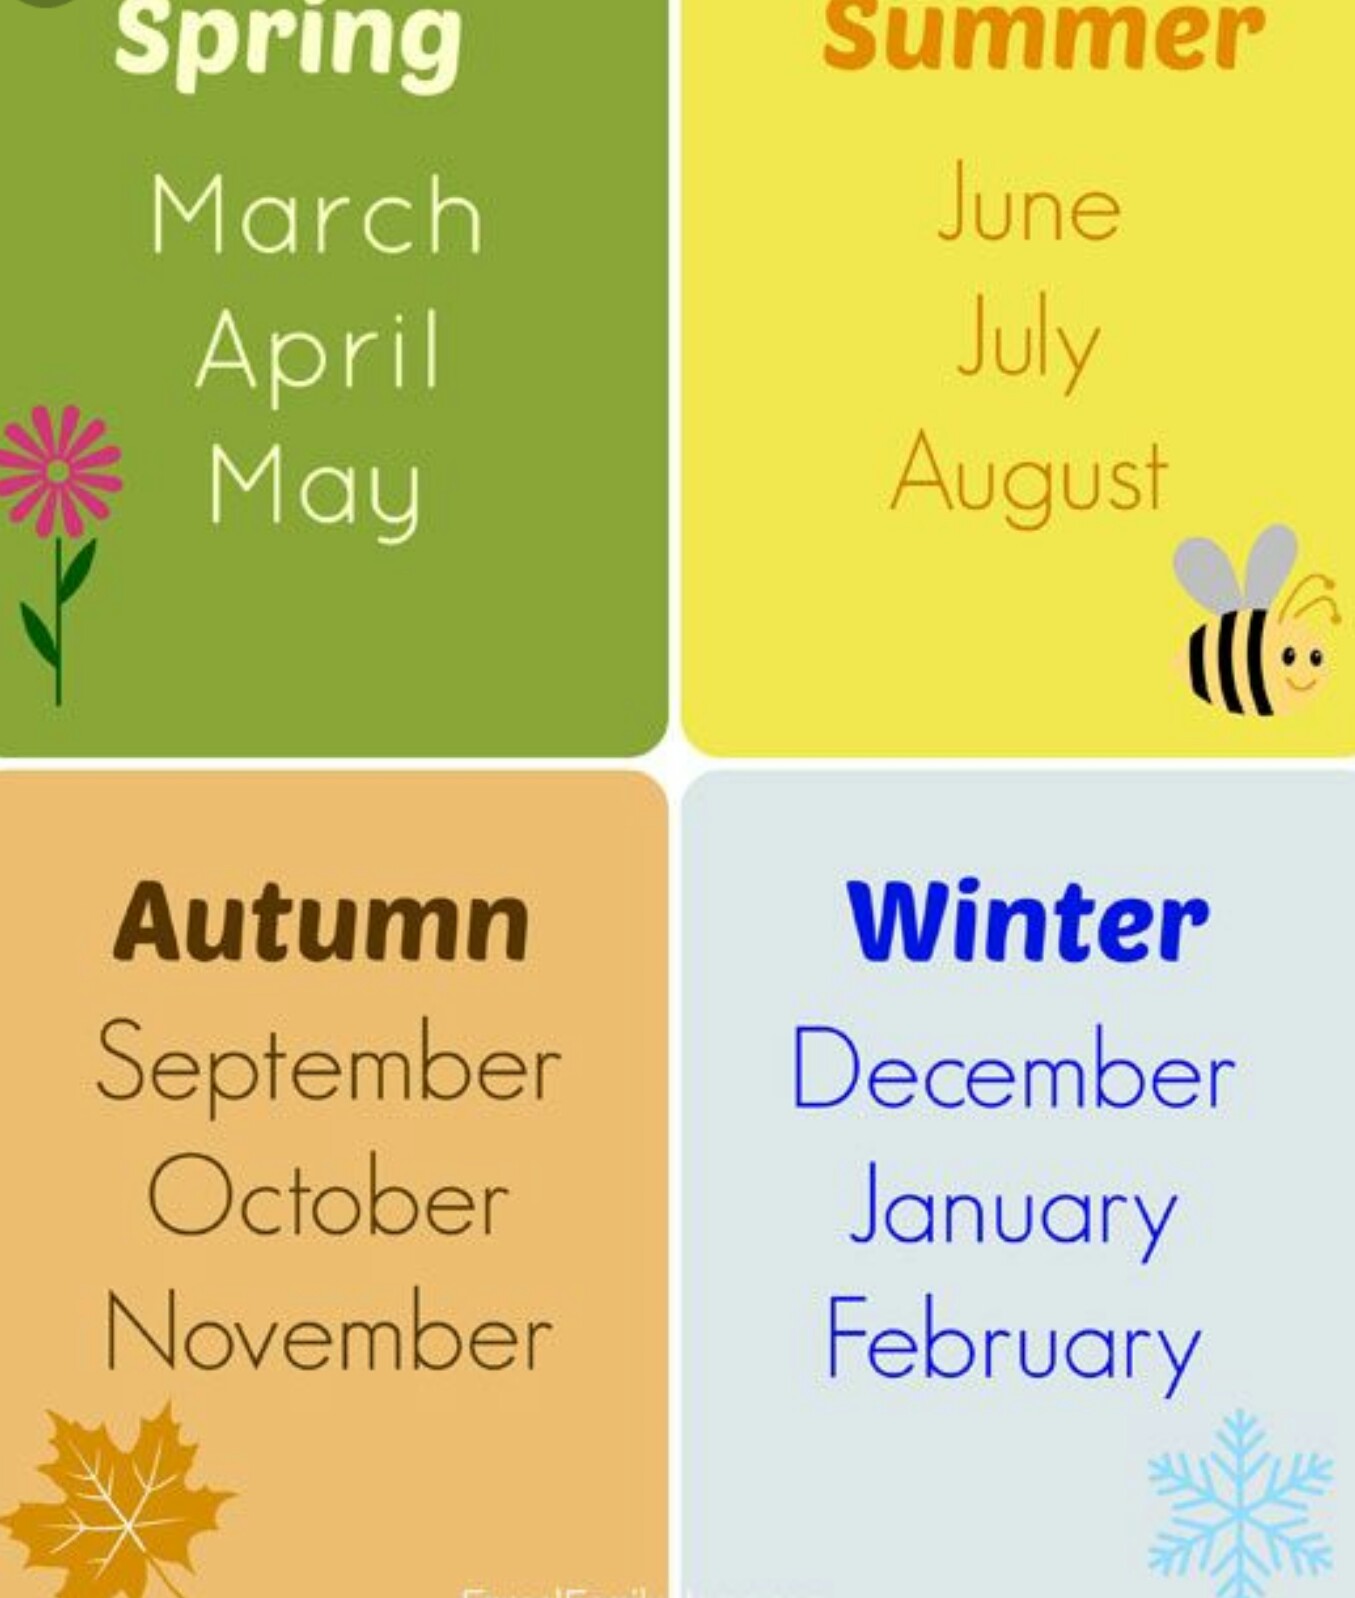 Months of the year for kids. Времена года на английском. Seasons and months. Месяца на английском. Времена года на английском языке для детей.